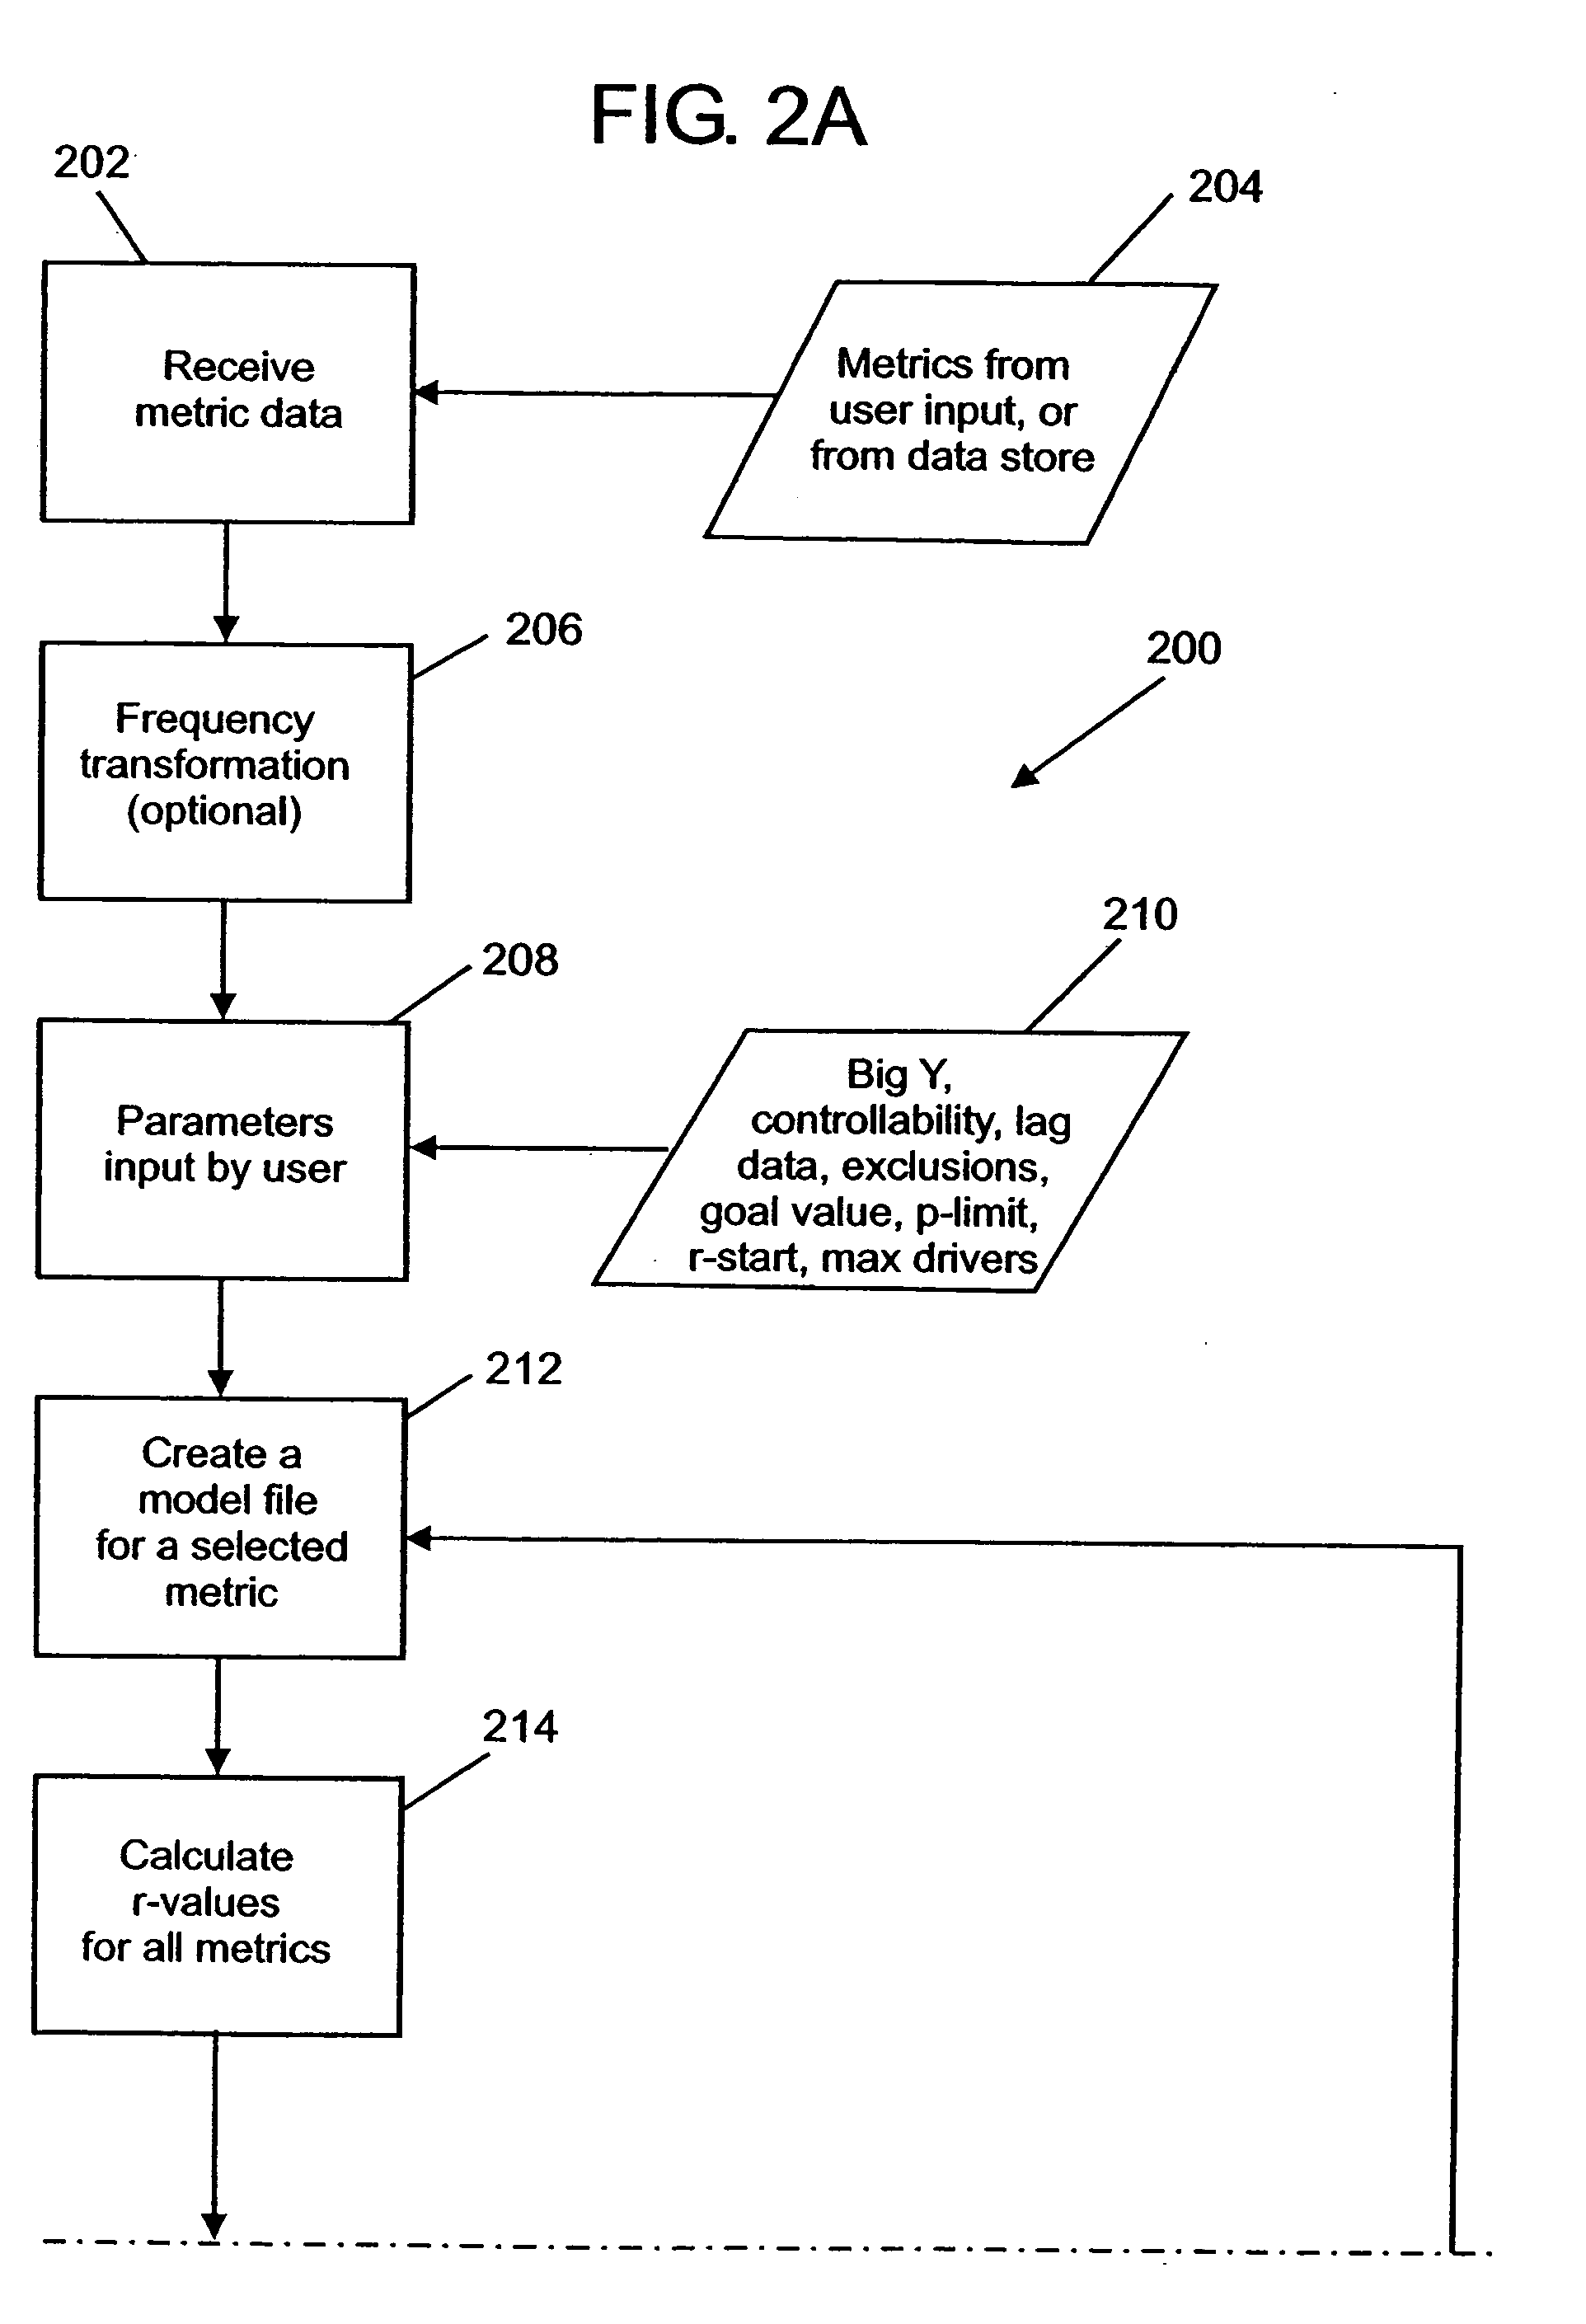 Method and apparatus for modeling a business process to facilitate evaluation of driving metrics